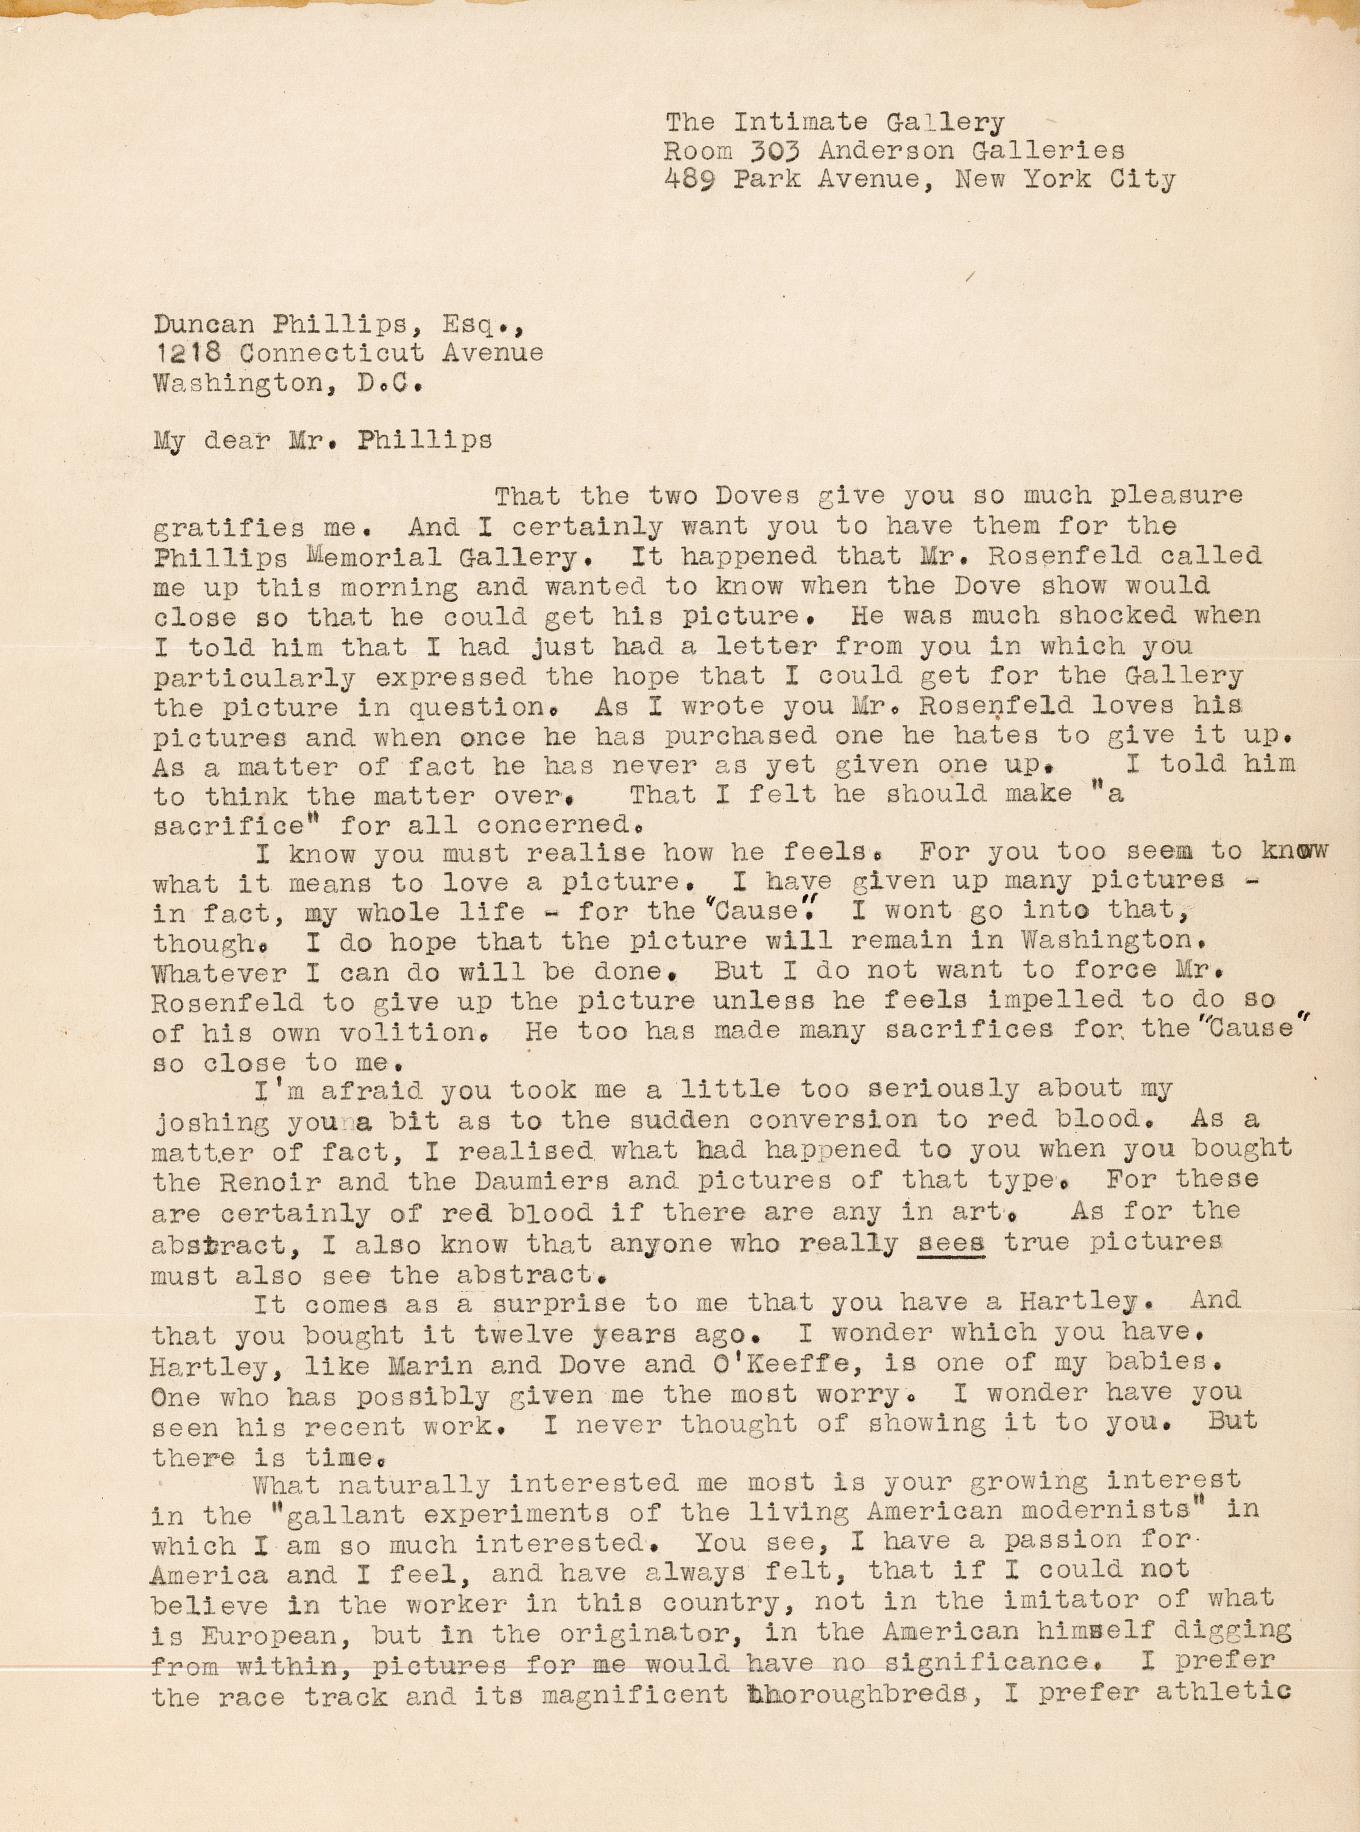 Letter from Stieglitz to DP February 1 1926